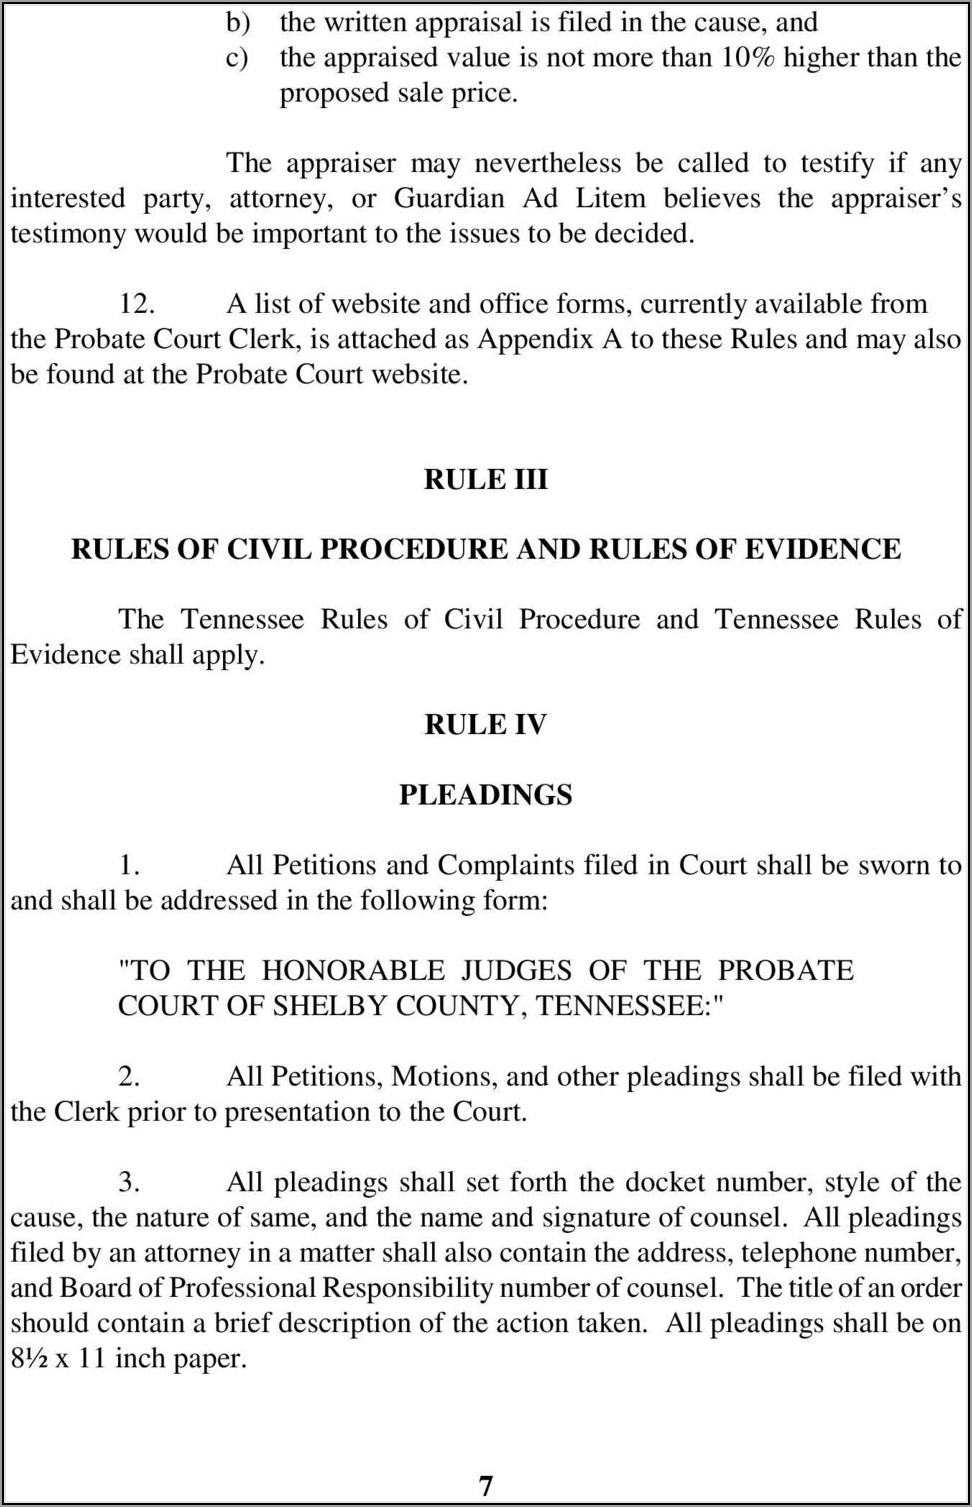 Shelby County Tennessee Divorce Forms